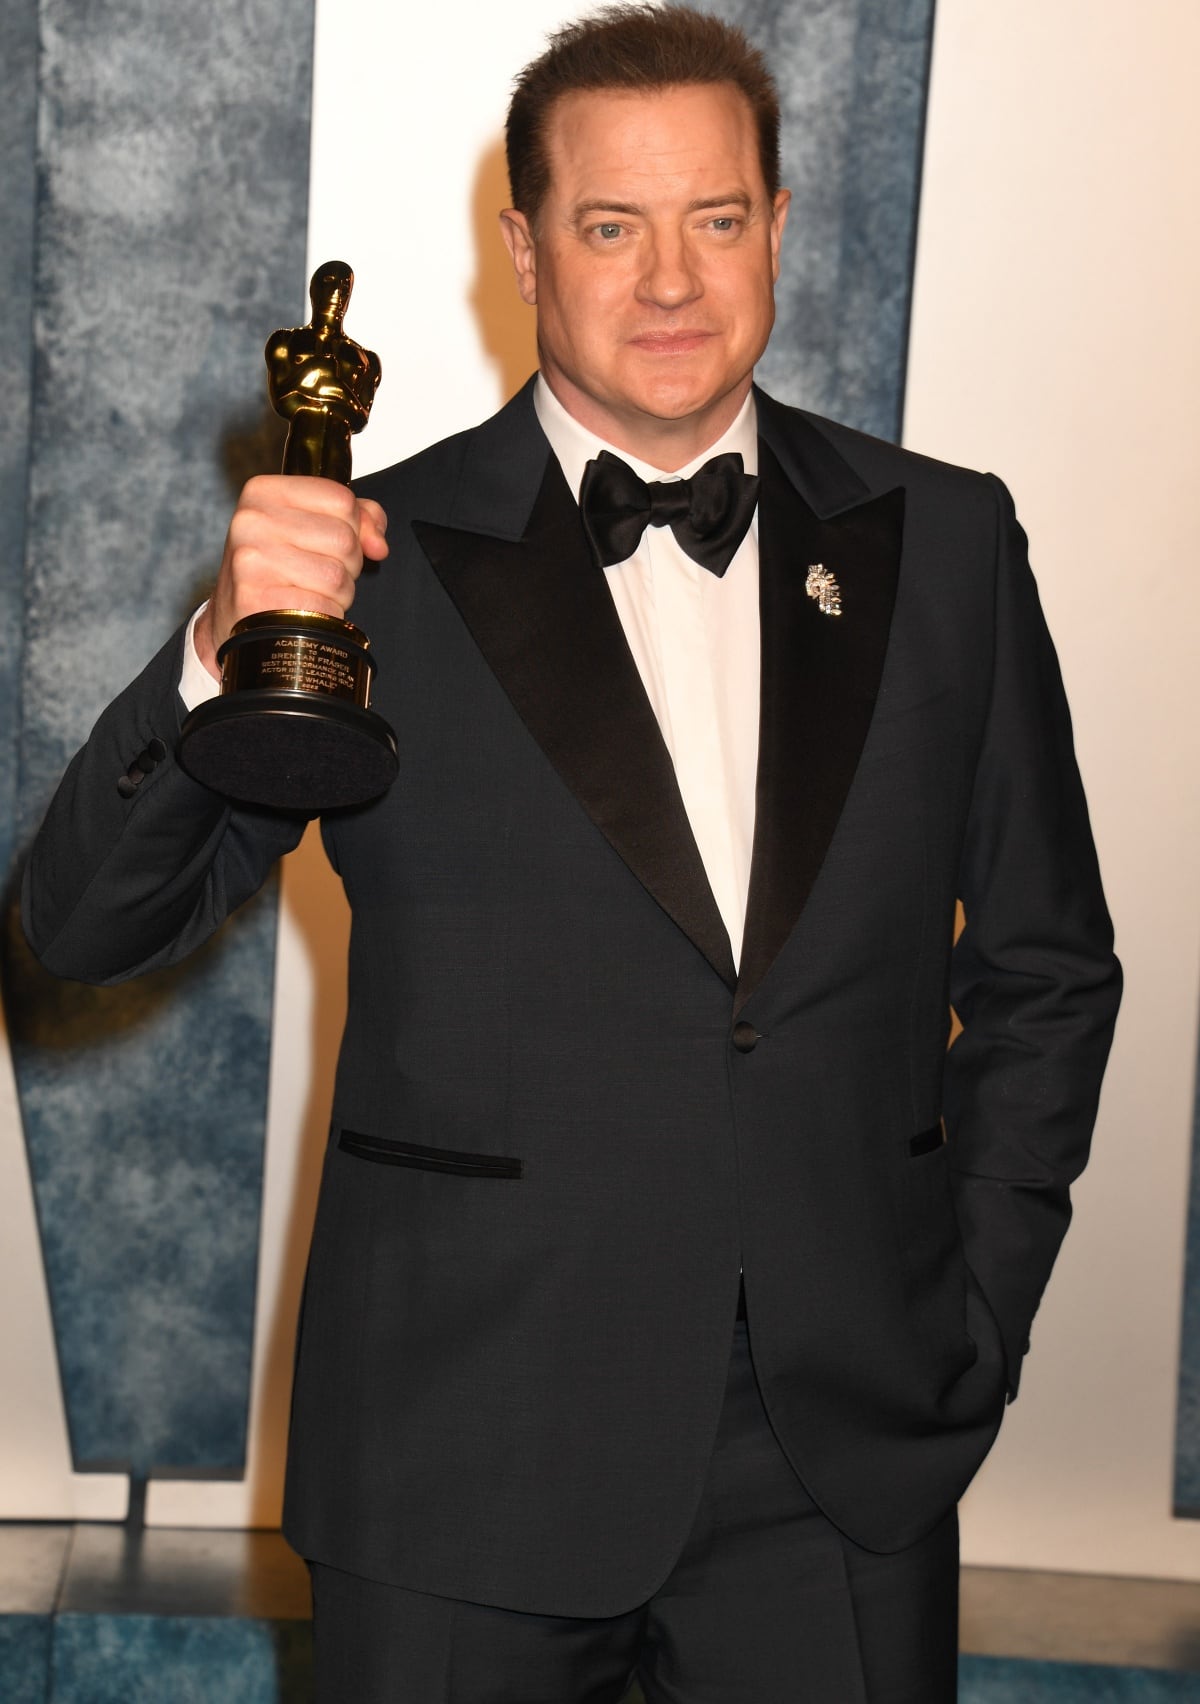 Brendan Fraser attending the 2023 Vanity Fair Oscar Party with his Oscar trophy in tow after winning Best Actor for his lead role in The Whale